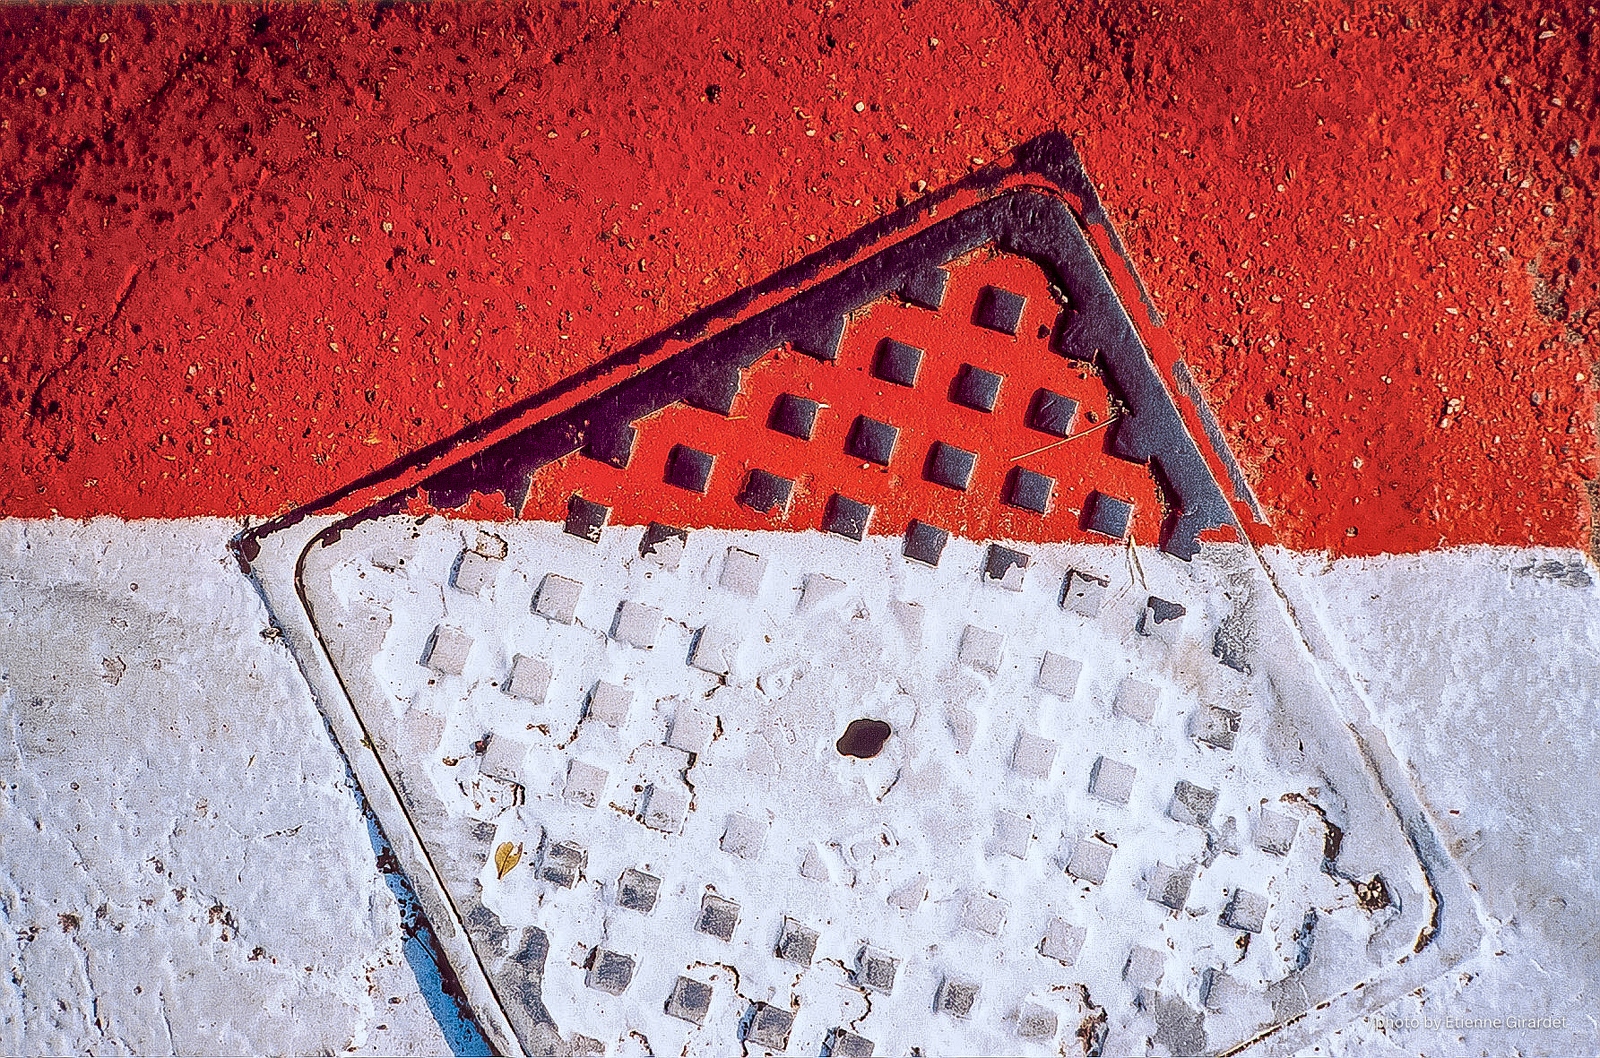 200310a_rot-weiss_G-manhole-cover-white-red-by-E-Girardet.jpg